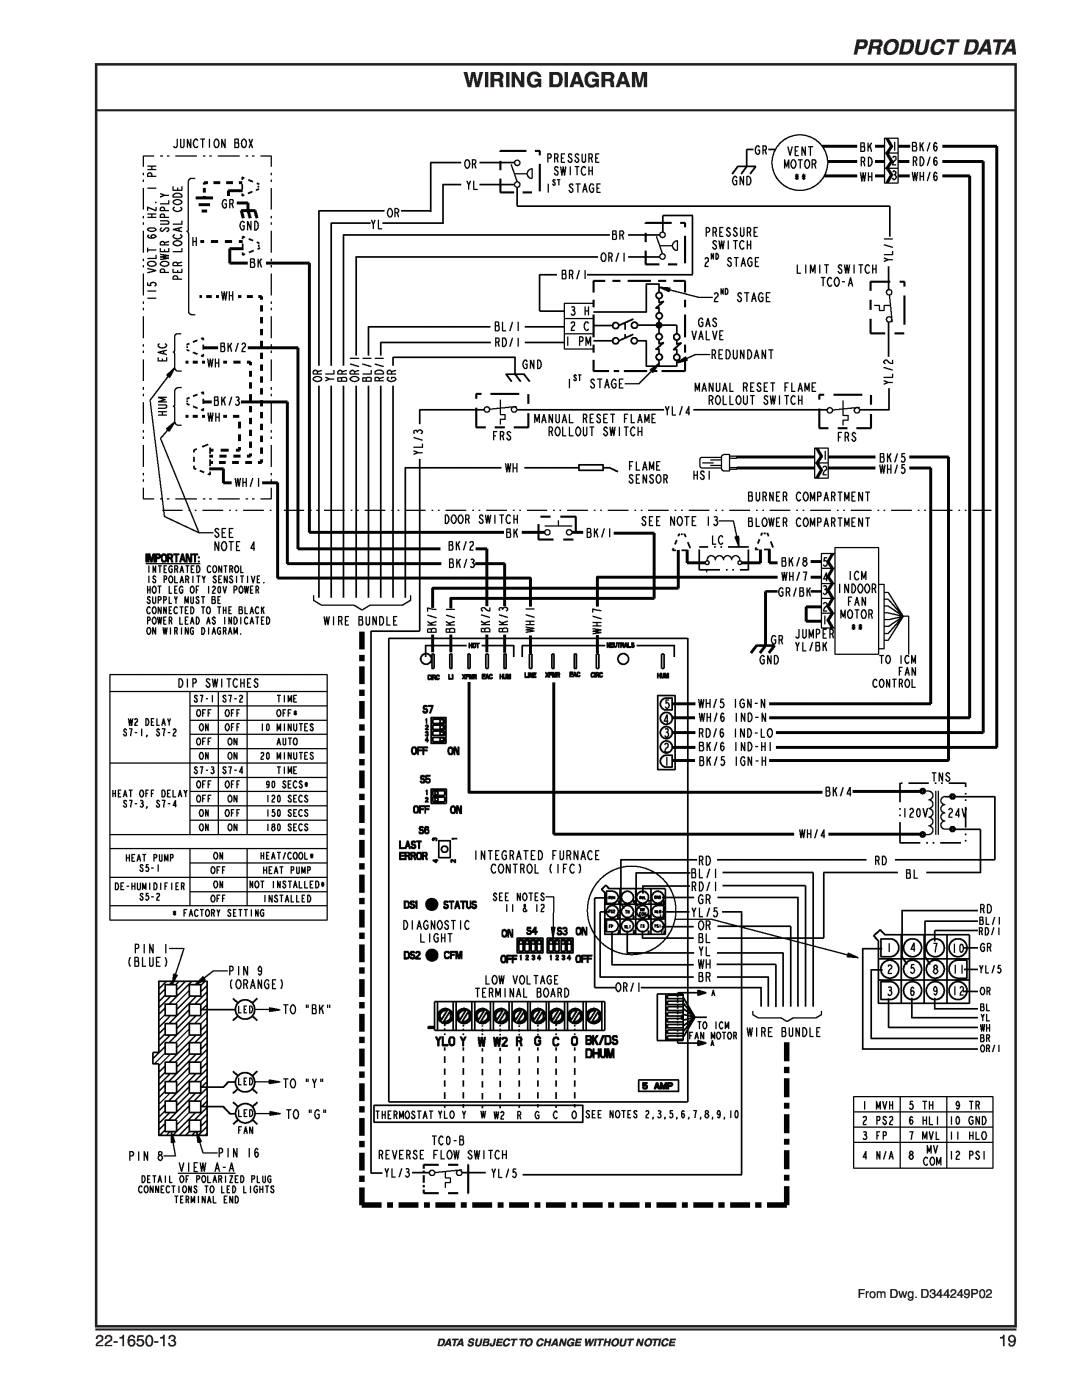 Trane TUD2D120A9V5VB Product Data, Wiring Diagram, 22-1650-13, From Dwg. D344249P02, Data Subject To Change Without Notice 